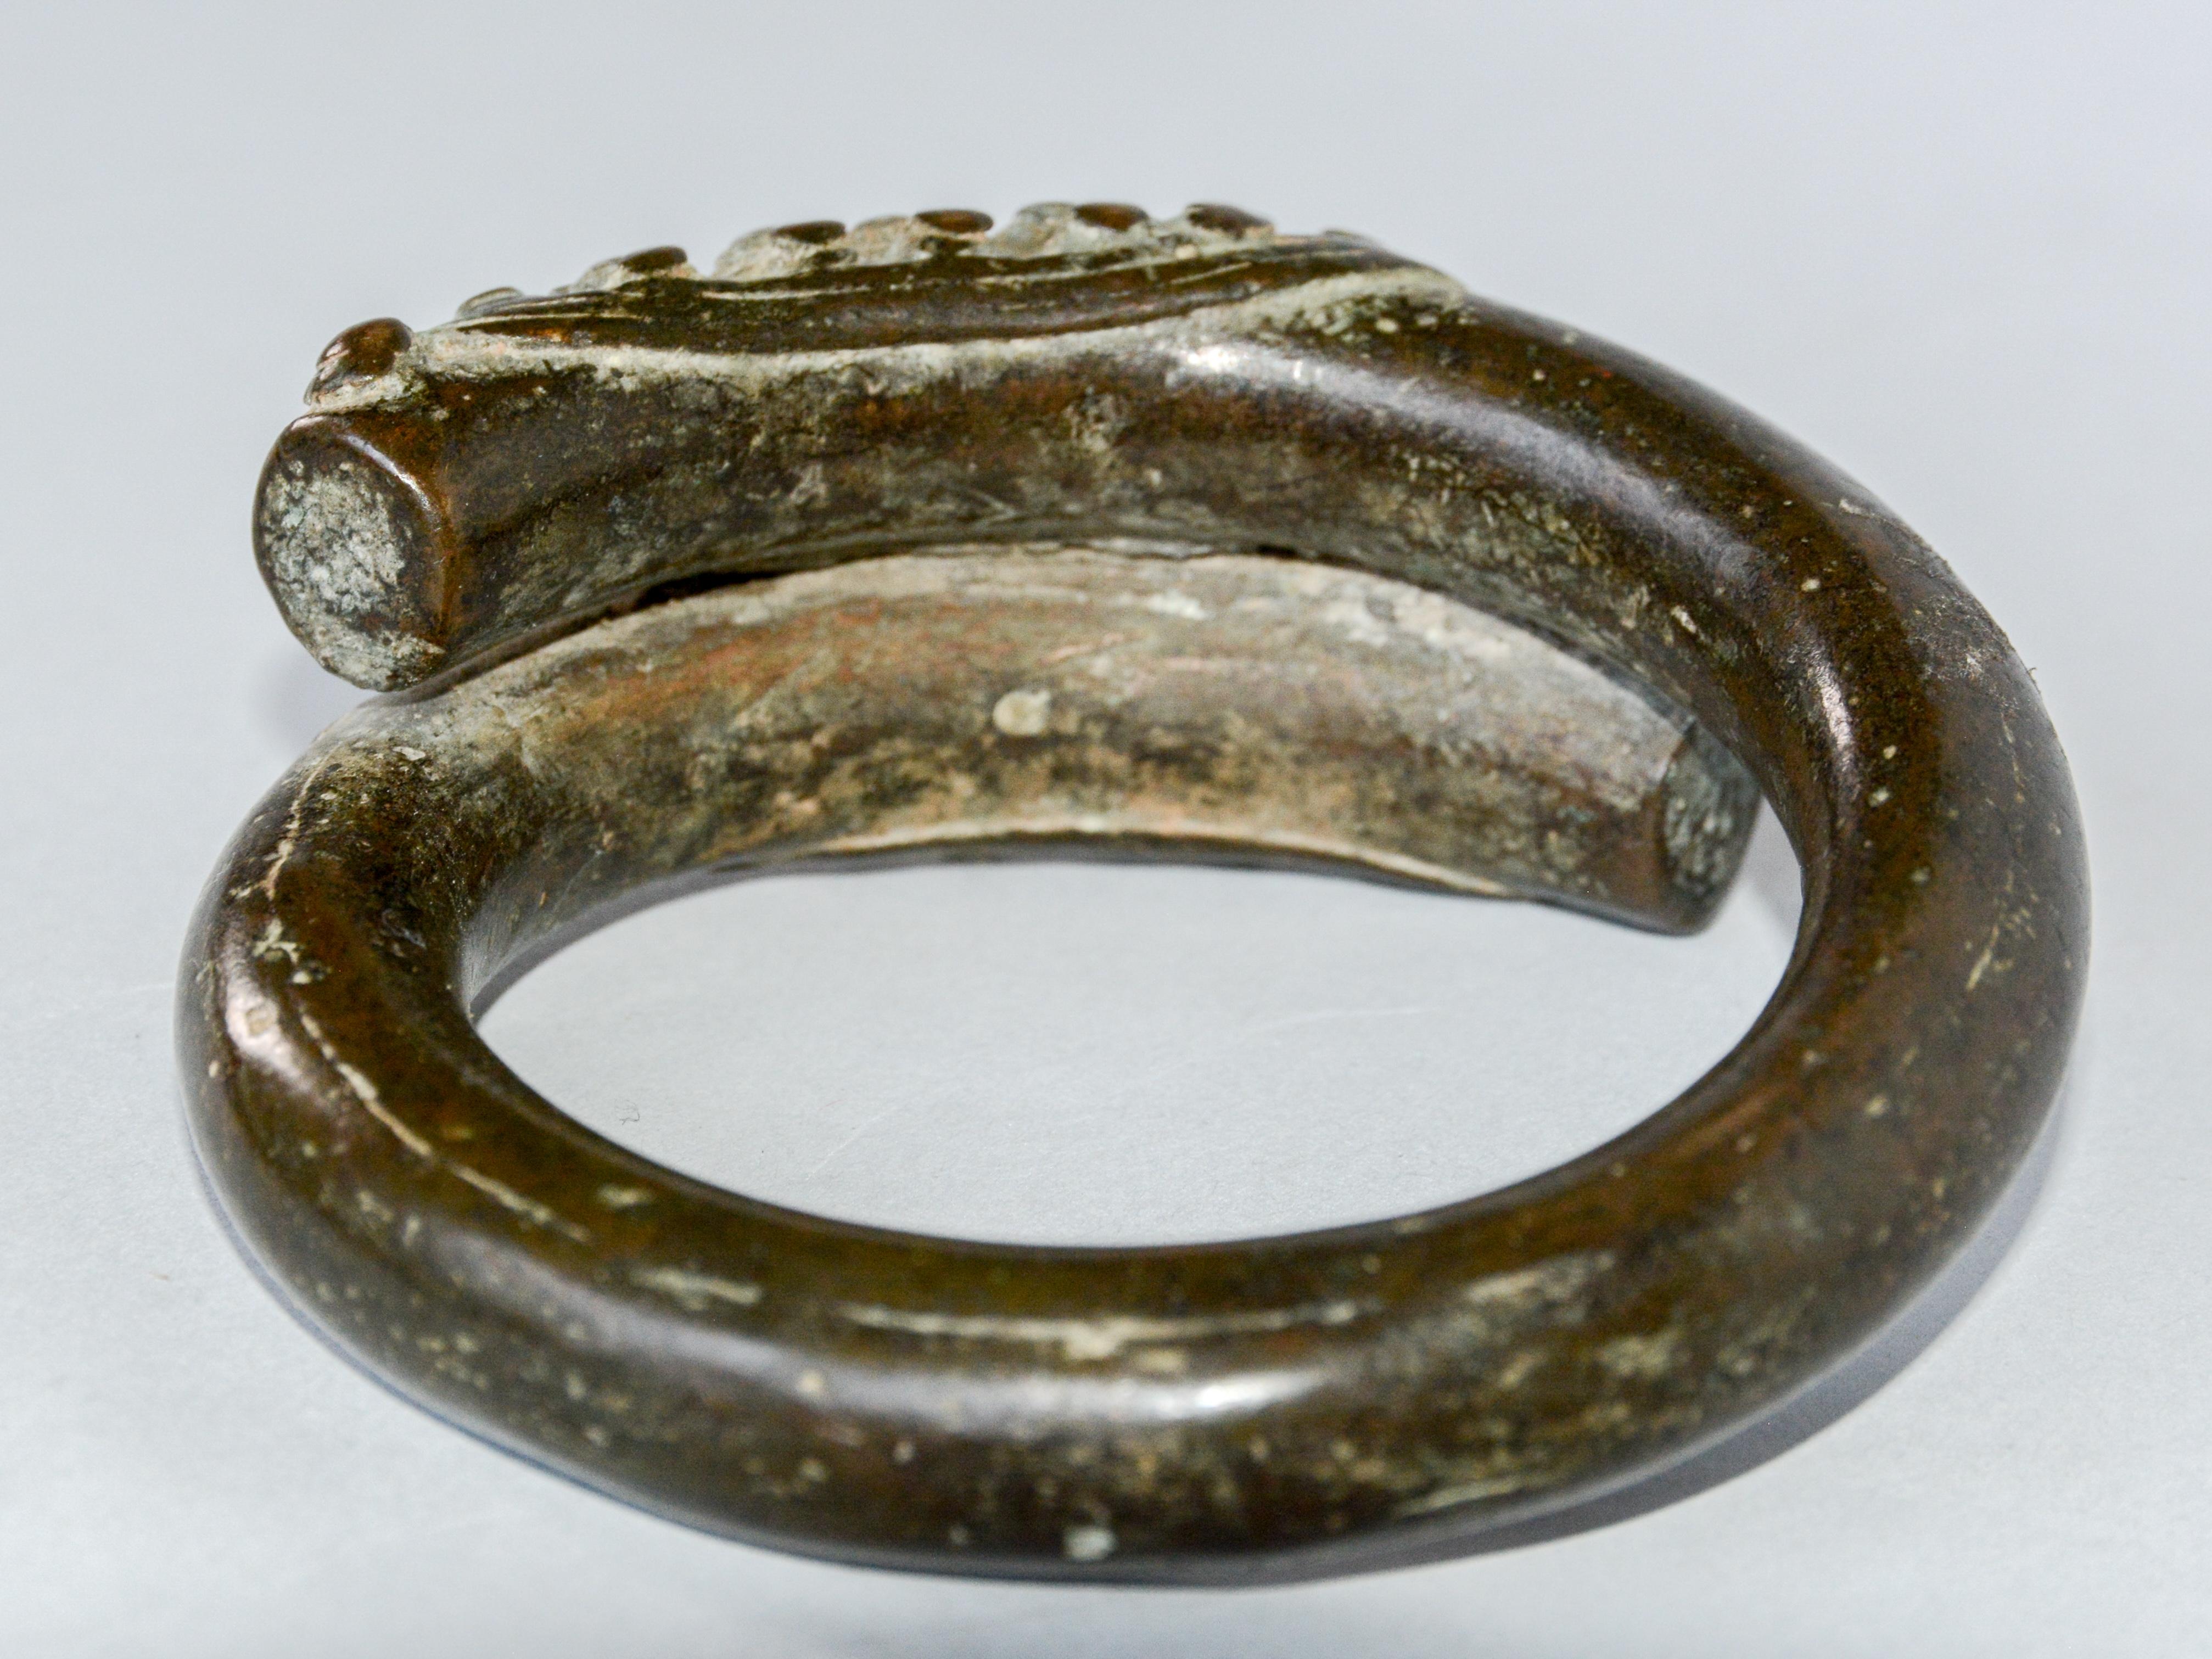 18th Century and Earlier Antique Bronze Bracelet from Laos with a Naga or Serpent Motif, 18th Century